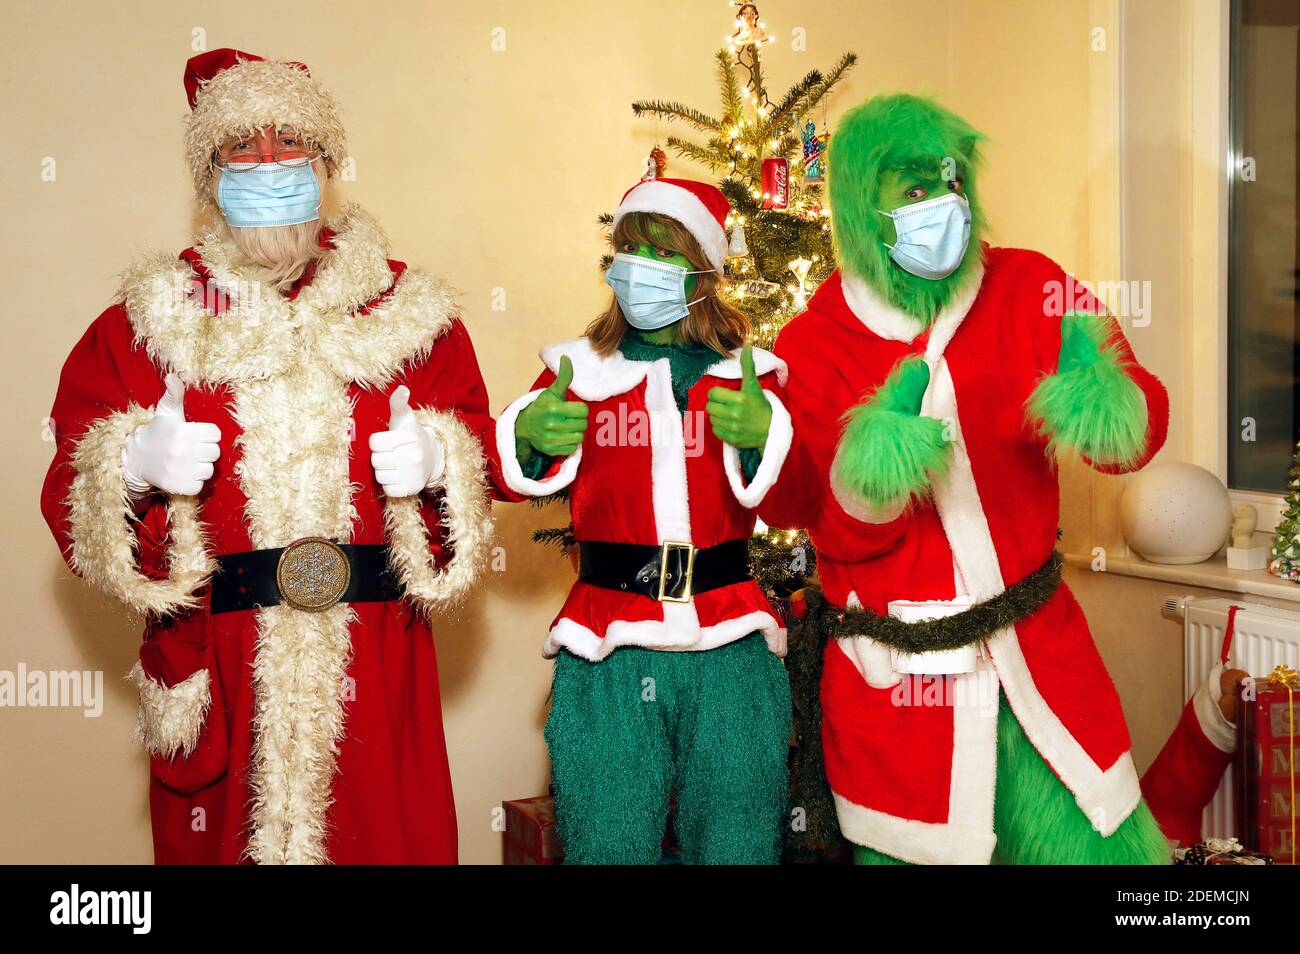 Santa Claus convinced the Grinch and Mrs. Grinch to wear a protective mask. GEEK ART - Bodypainting and Transformaking: 'The Grinch steals Christmas' photoshooting with Enrico Lein as Grinch, Maria Skupin as Mrs. Grinch and Fabian Zesiger as Santa Claus at the Villa Czarnecki in Hameln on November 30, 2020 - A project by the photographer Tschiponnique Skupin and the bodypainter Enrico Lein Stock Photo